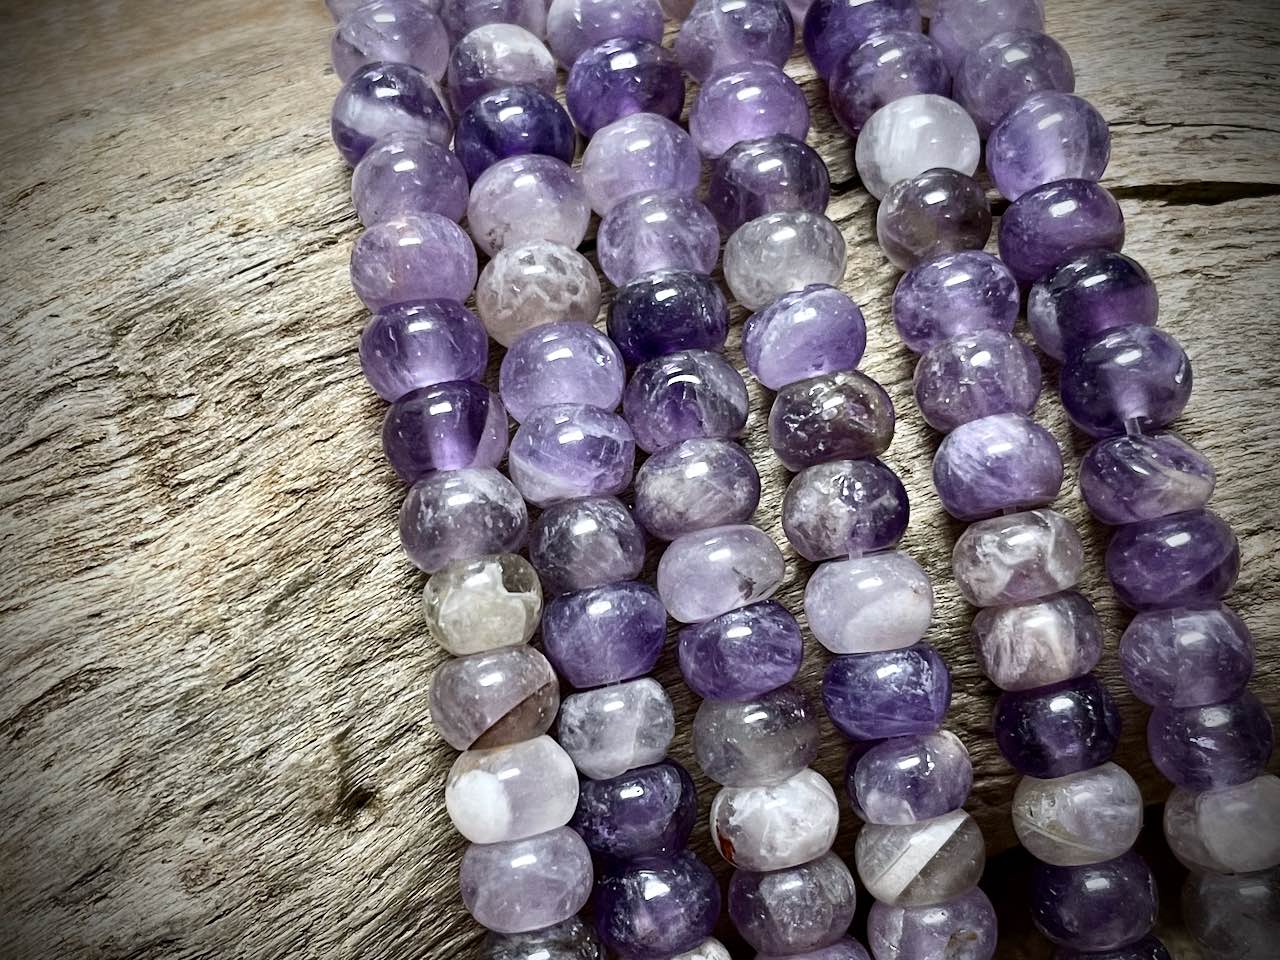 Amethyst Smooth Rondelle Beads - 6mm x 4mm - 8”